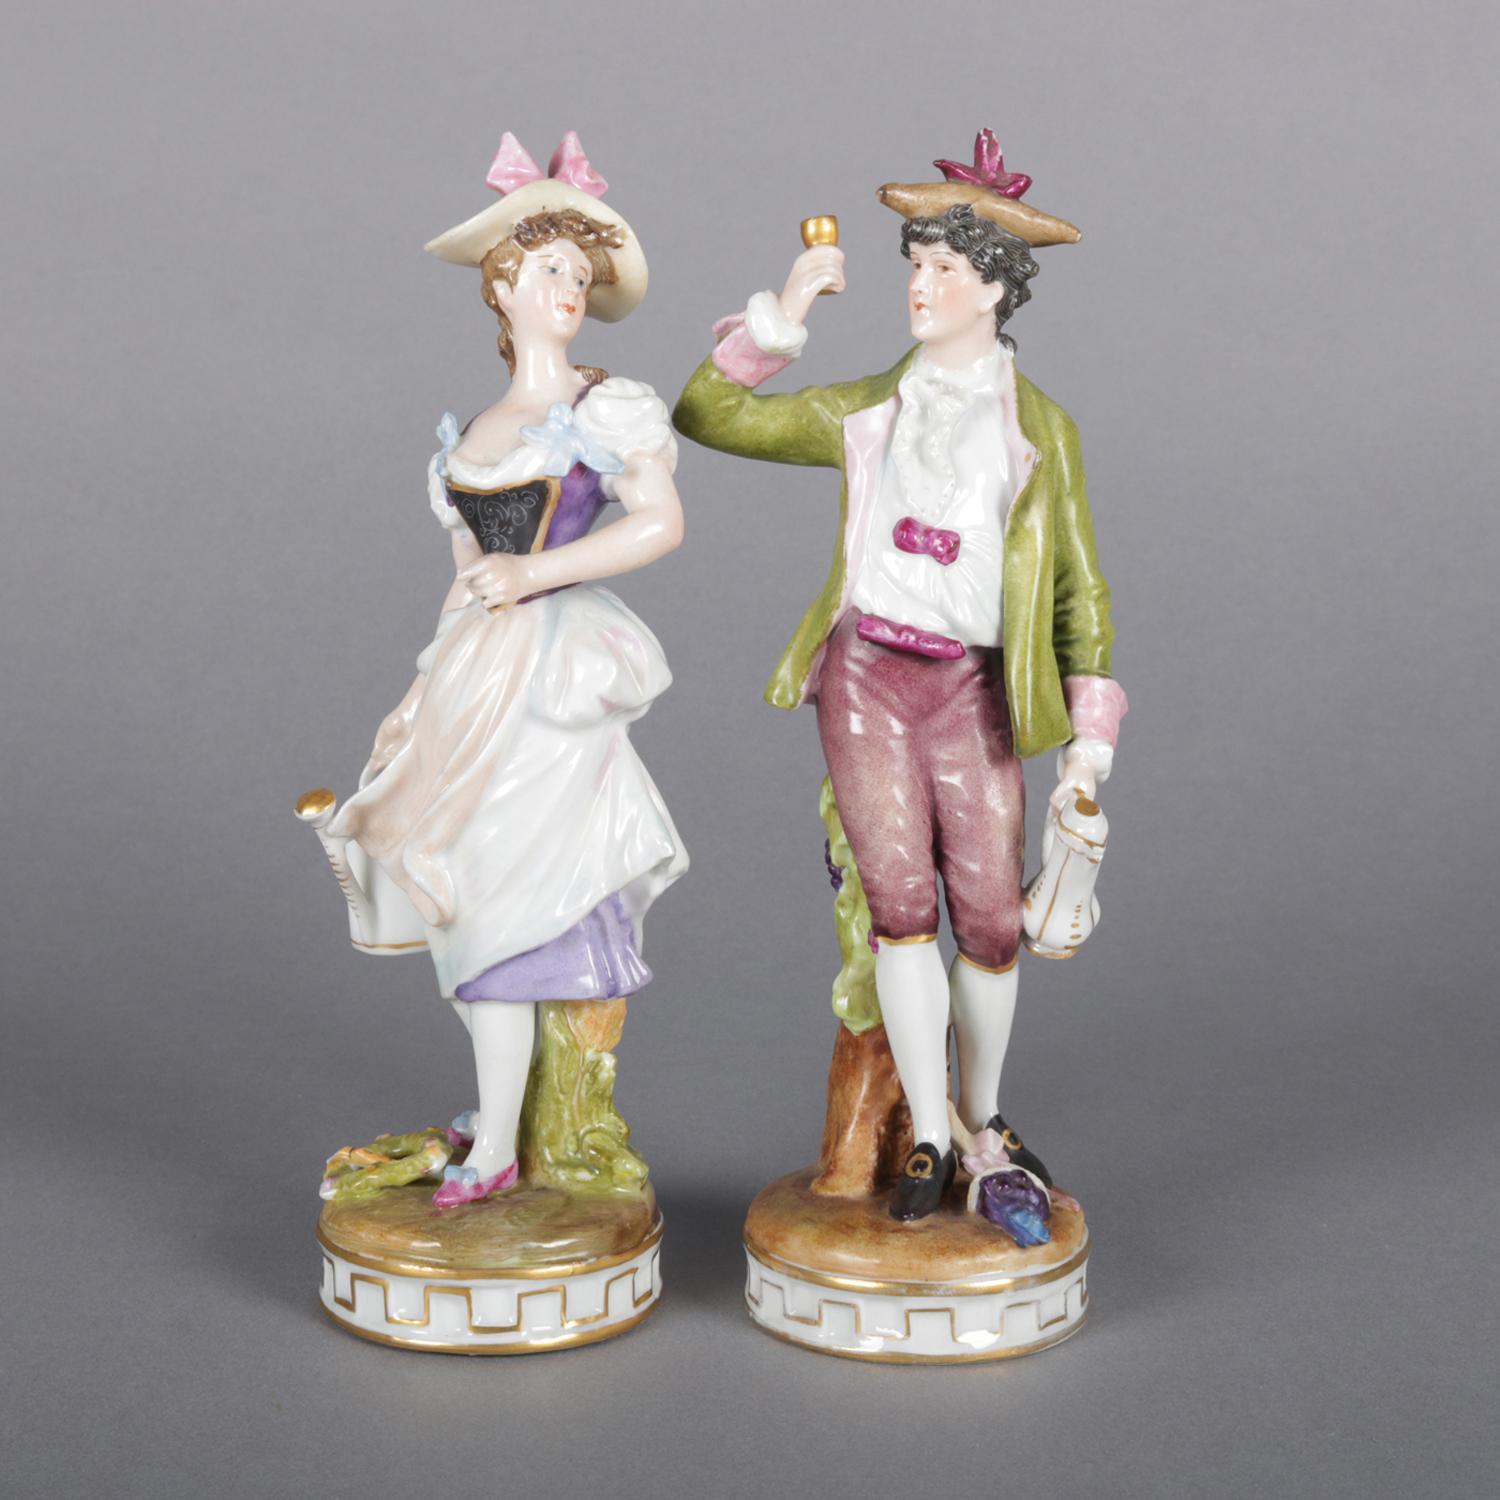 Antique pair of German Meissen porcelain figures depict courting couple and feature hand-painted decoration with gilt highlights, marked on base as photographed, circa 1880.

Measures: 7.75